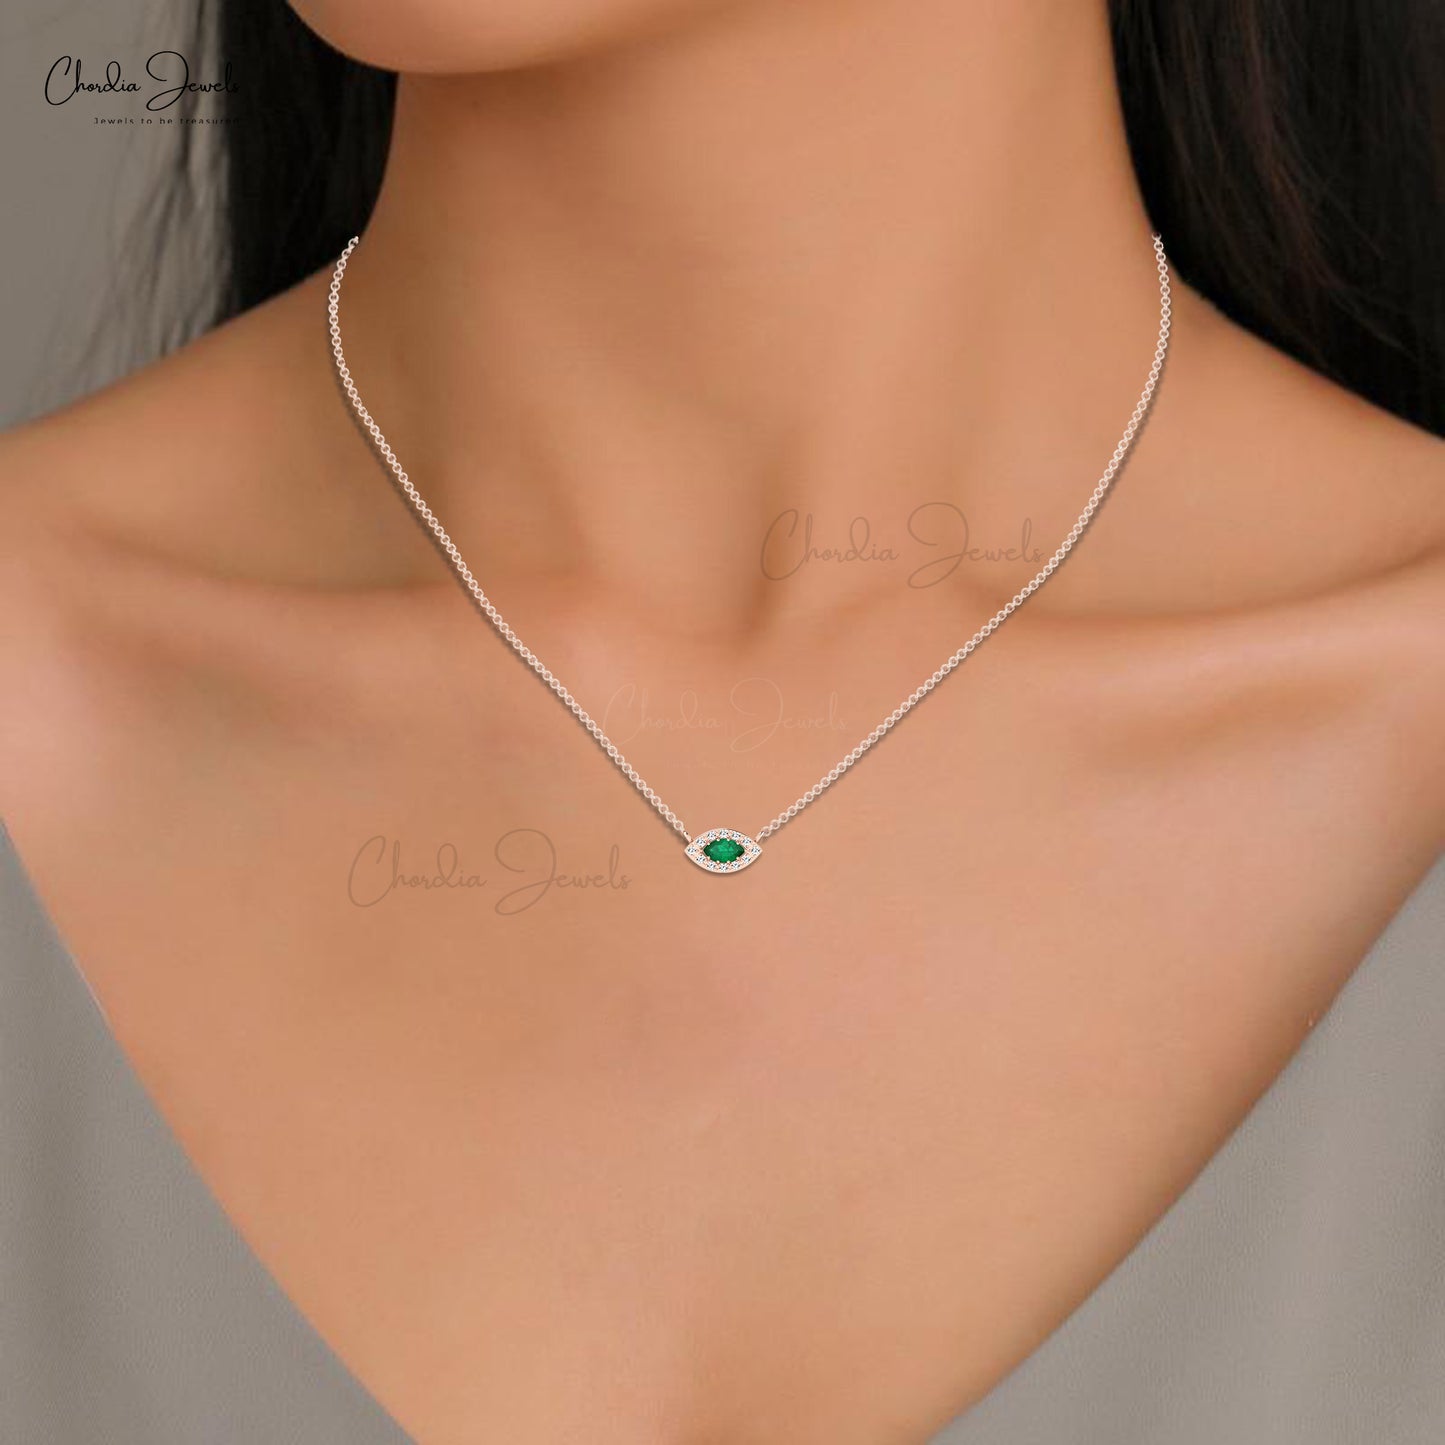 Customized Natural White Diamond Halo Necklace Pendant in Real 14k Gold Marquise Shape Green Emerald Gemstone Pendant Jewelry For Wife